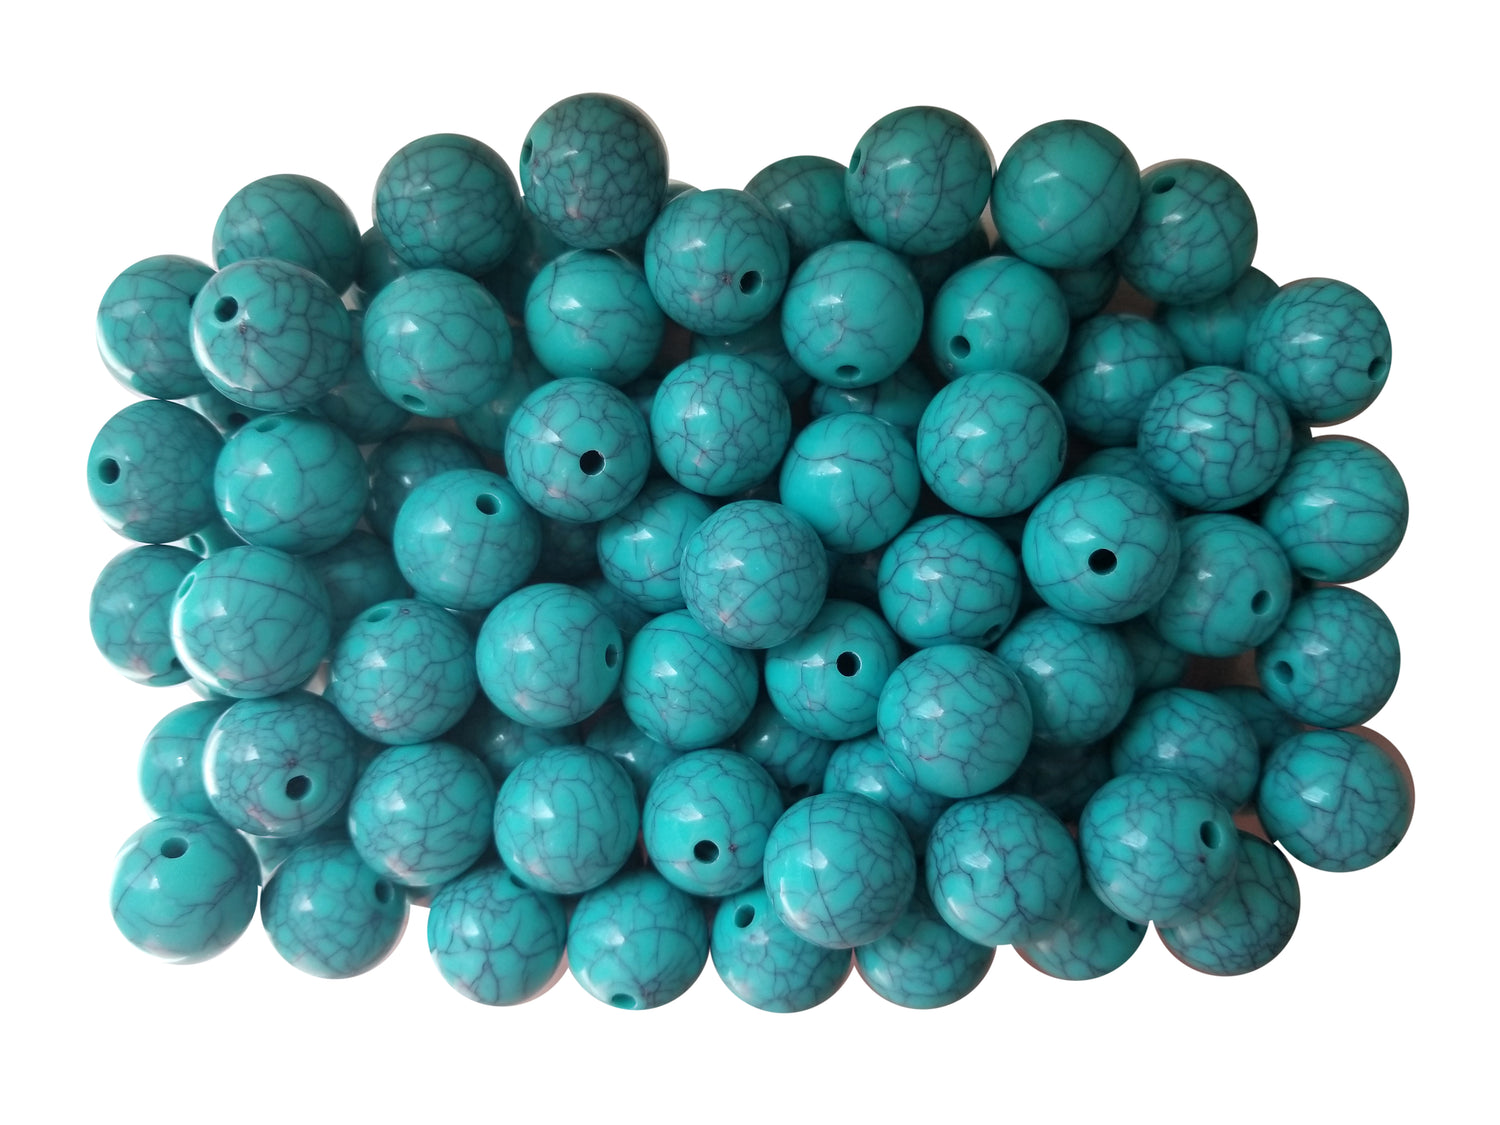 cracked turquoise 20mm printed bubblegum beads